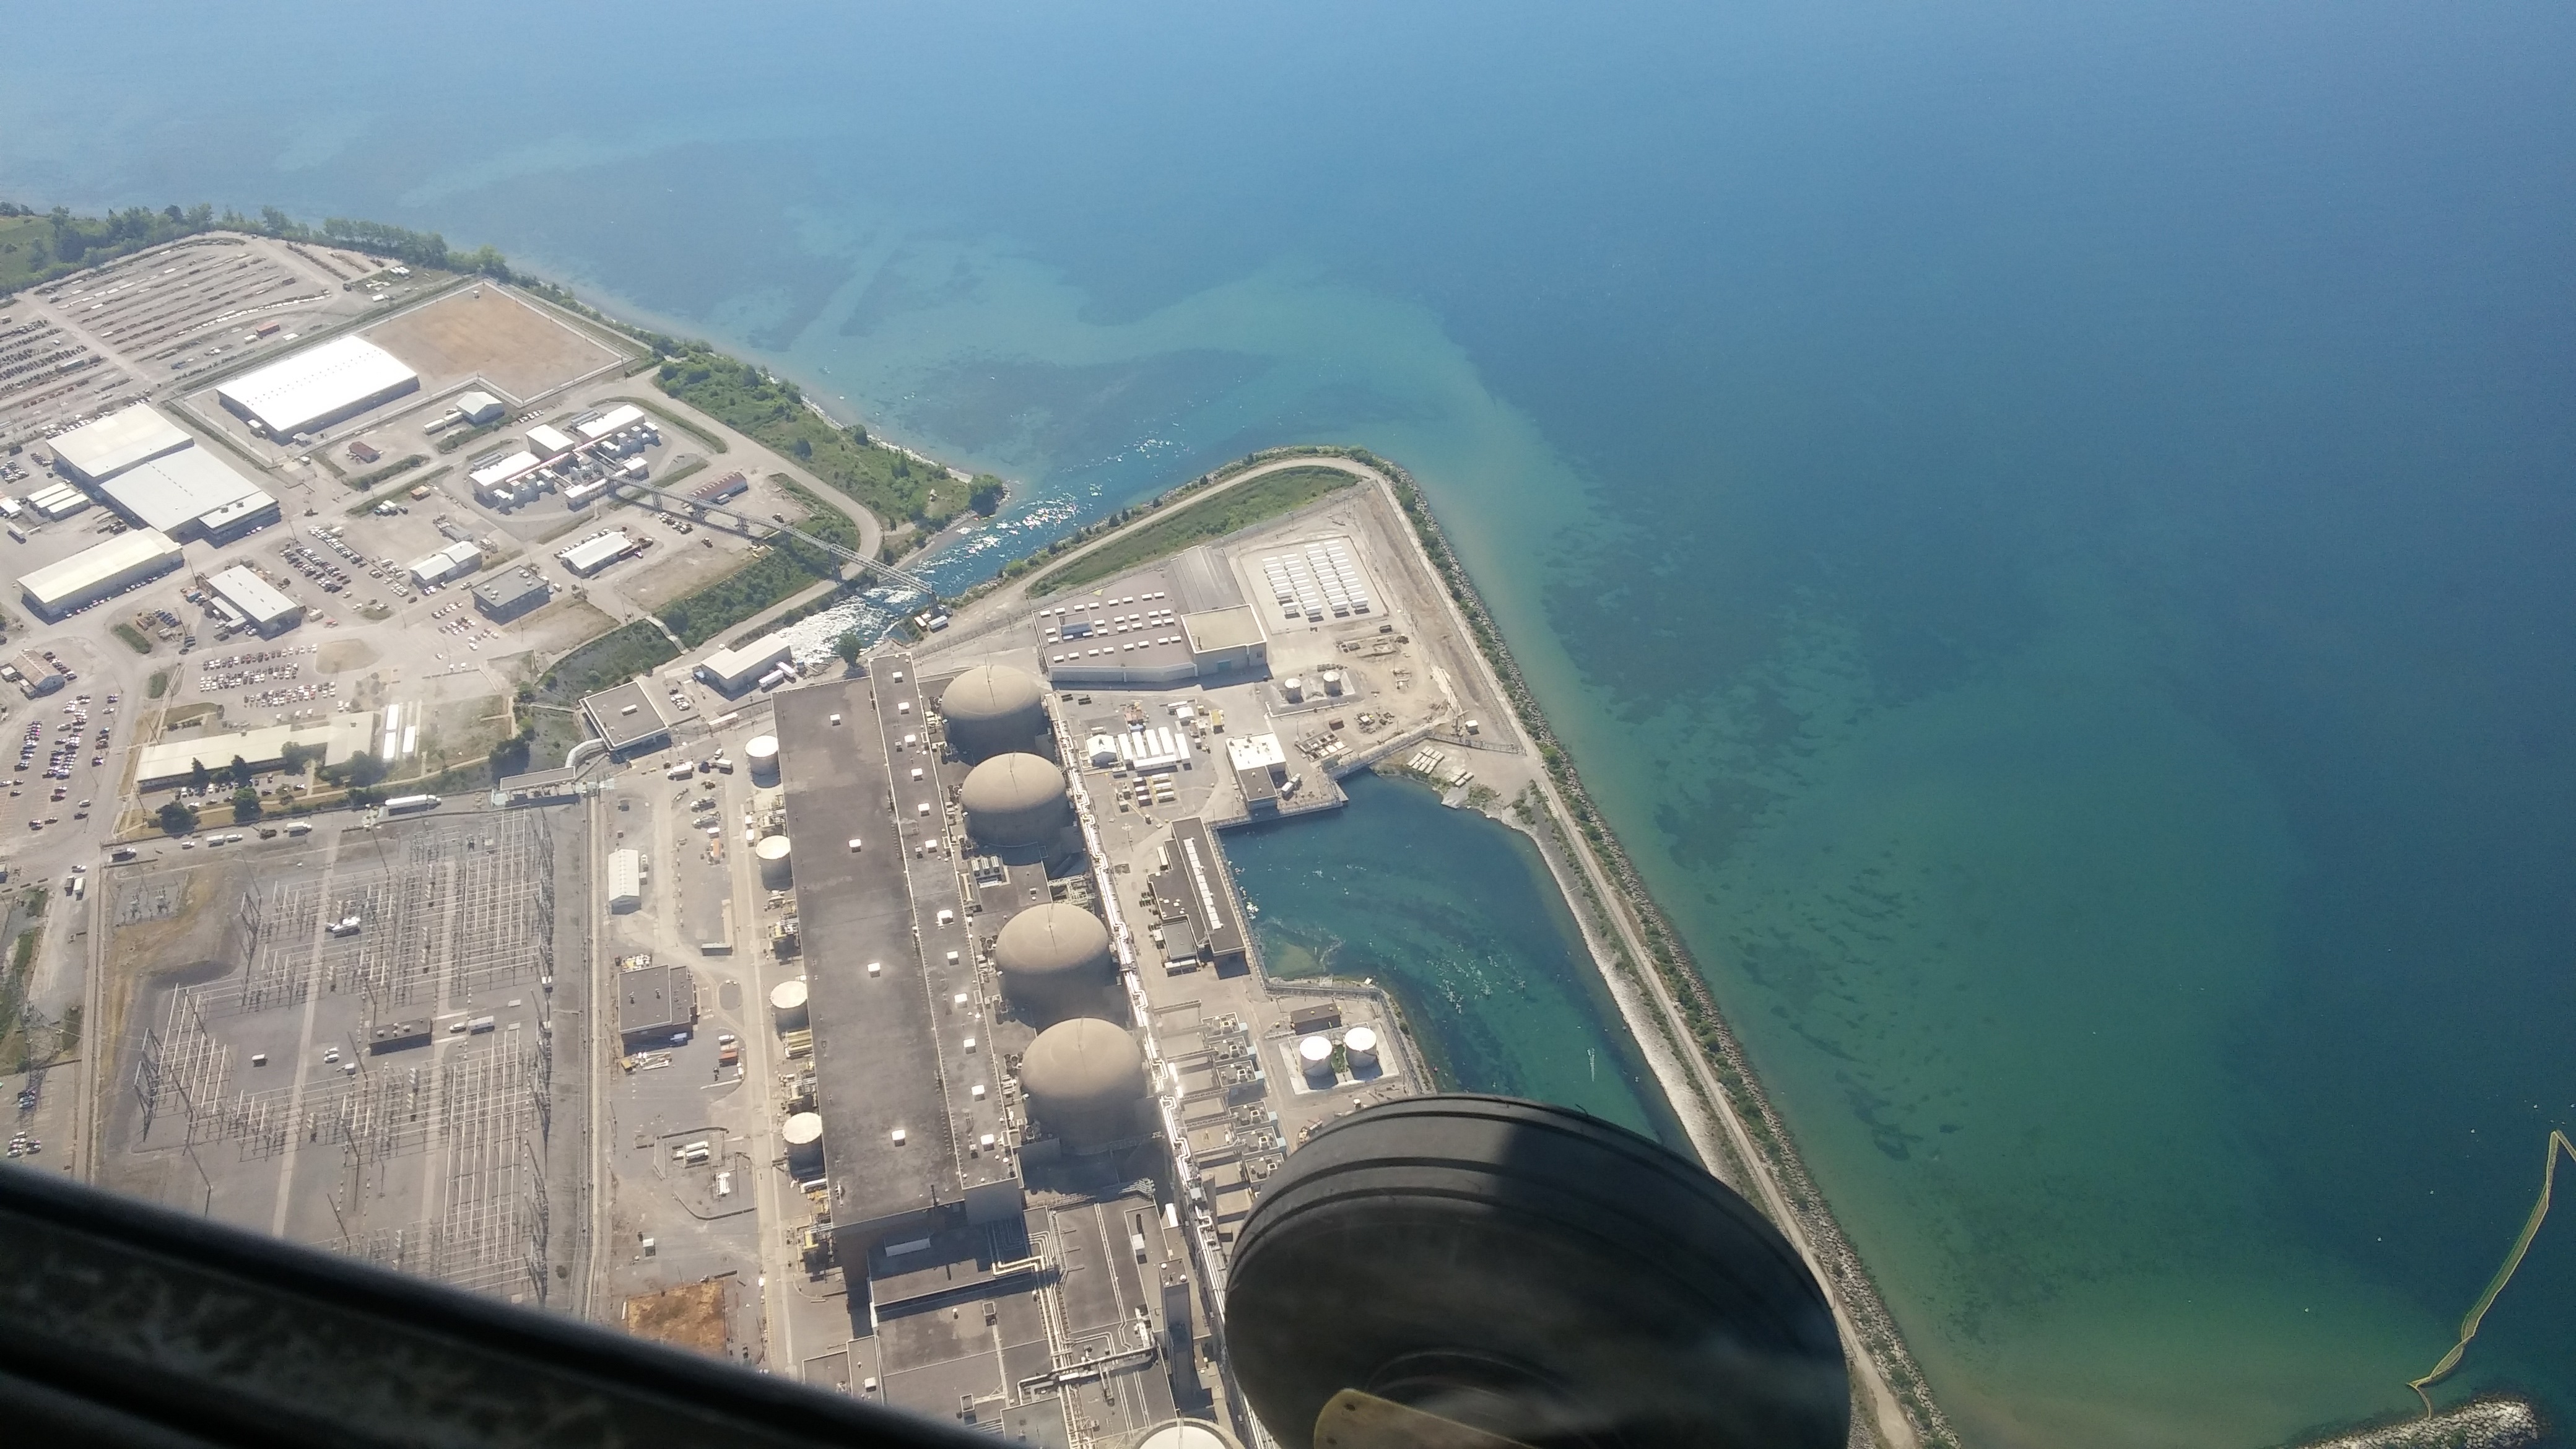 The Pickering Nuclear Generating Station